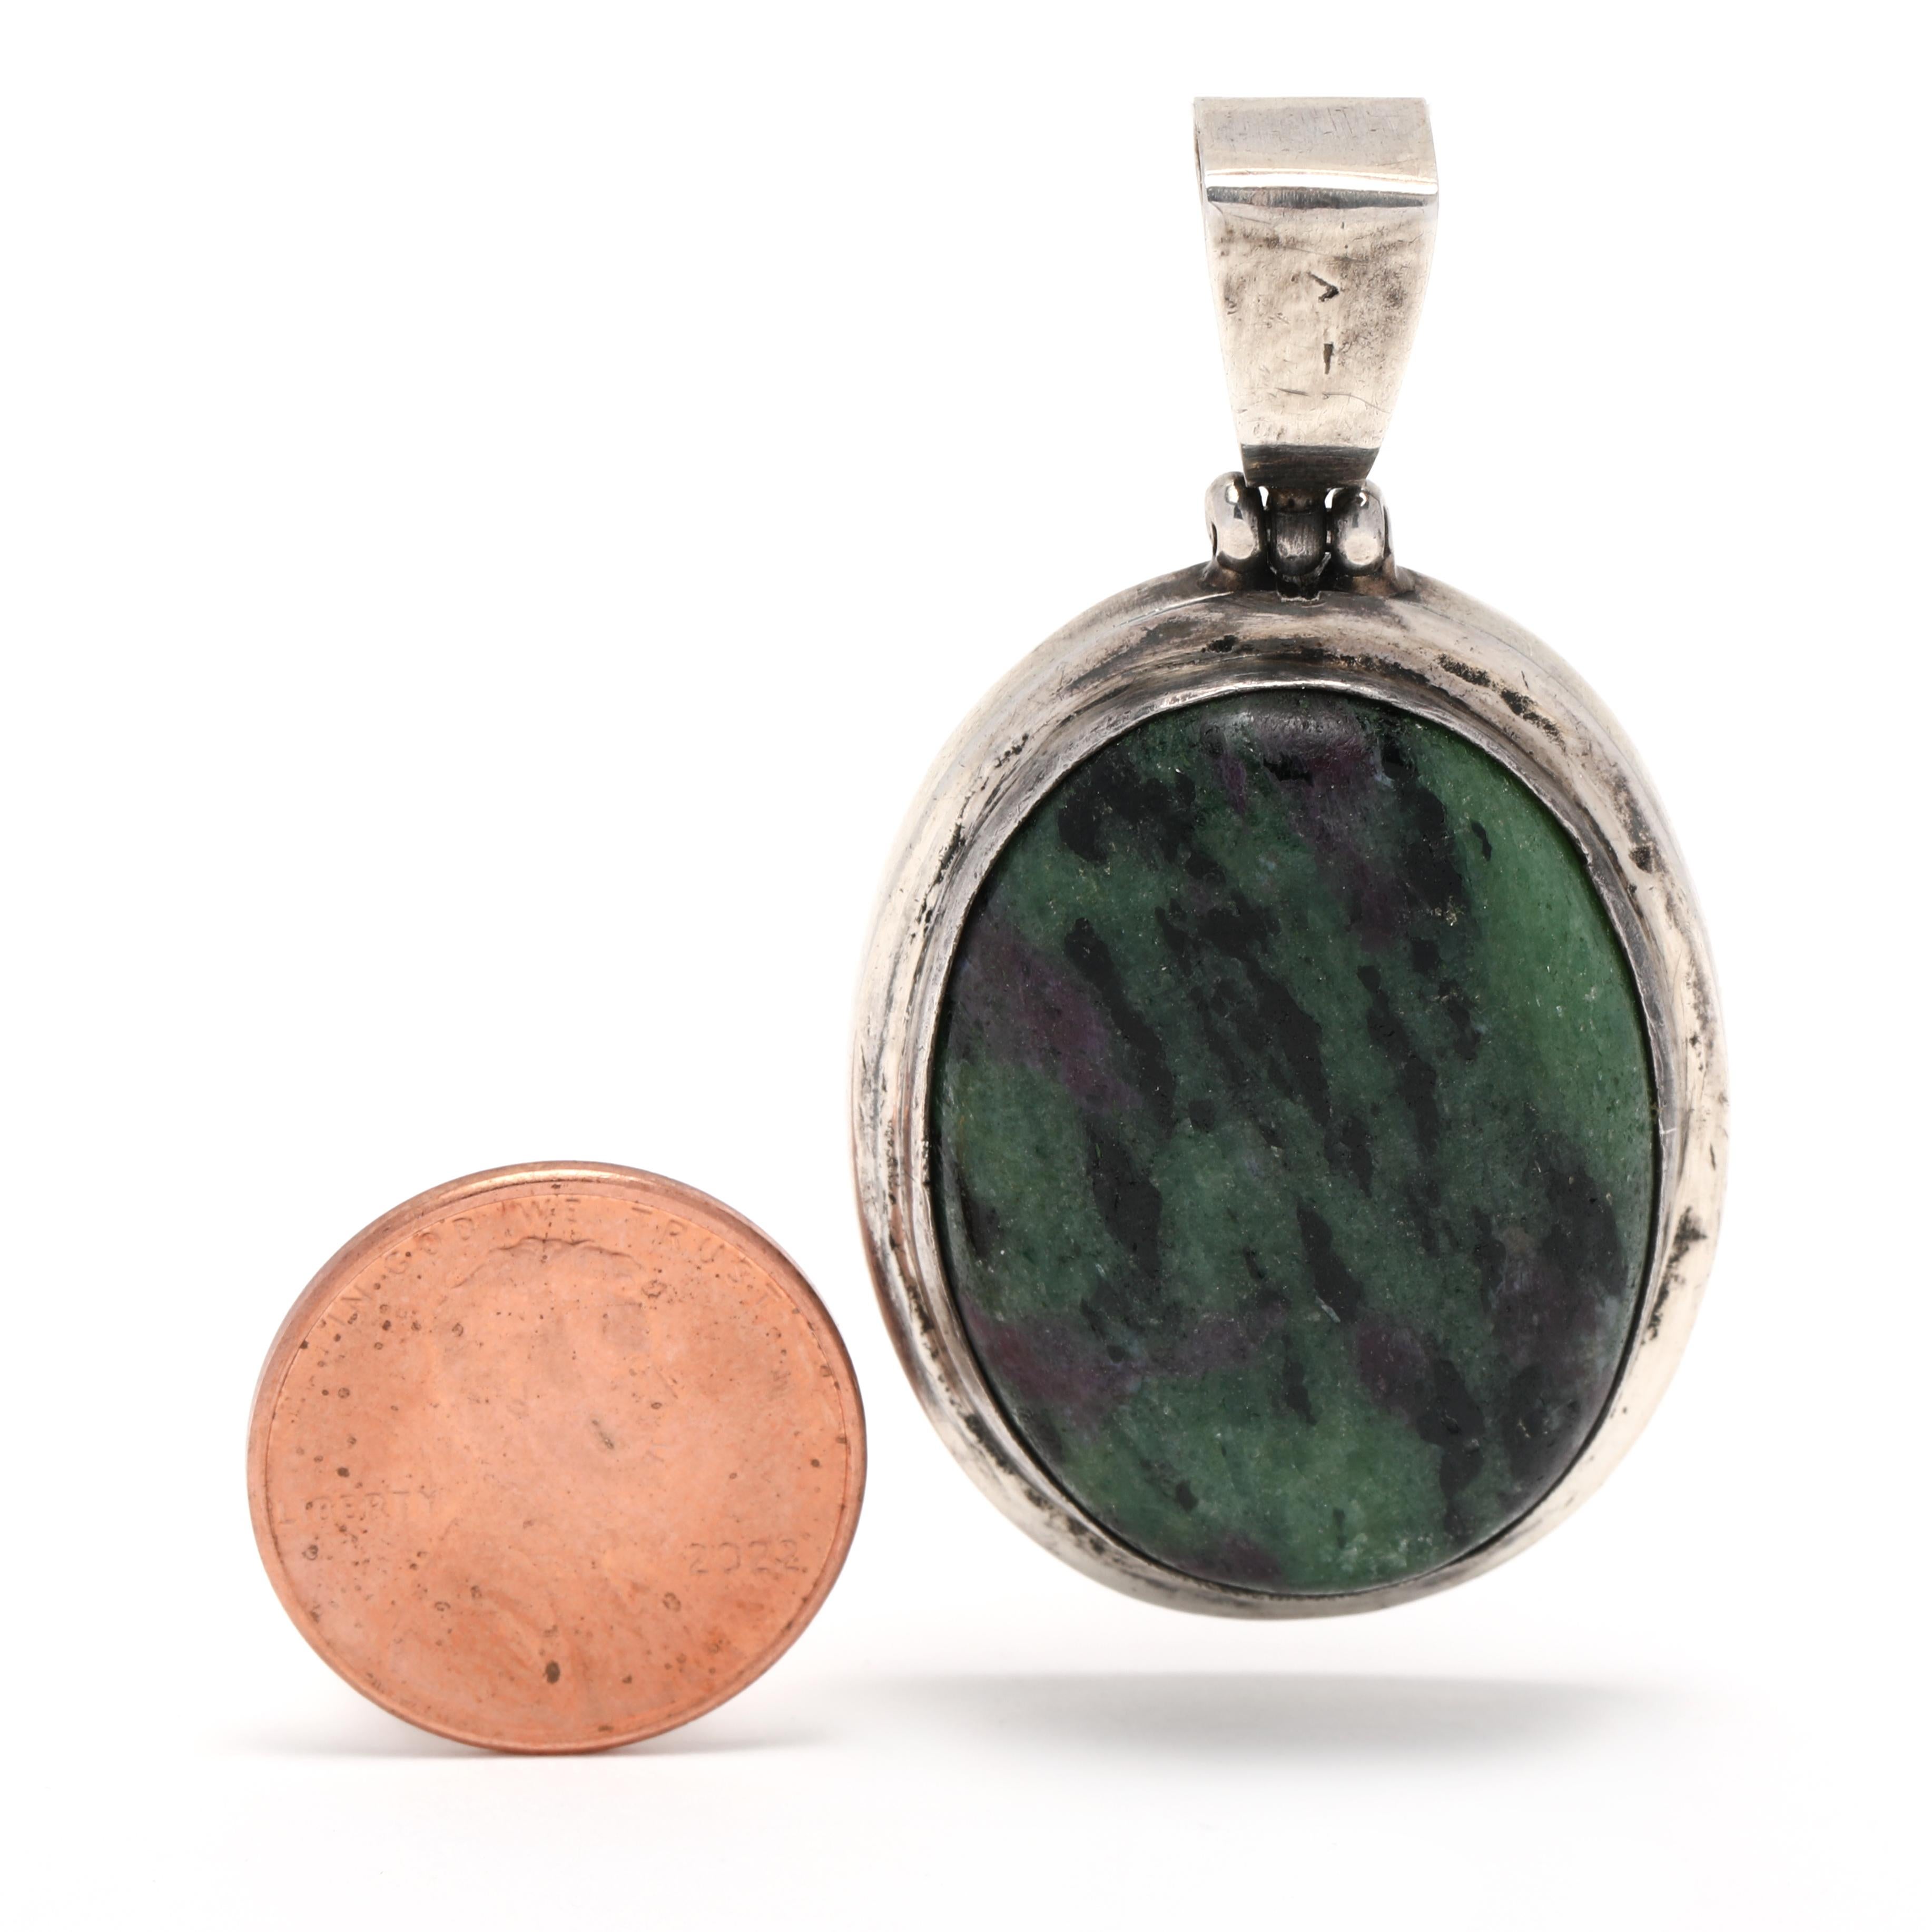 This stunning vintage pendant features a large oval ruby in zoisite stone, set into a sterling silver bezel. The unique gemstone is naturally deep green with contrasting red ruby crystals throughout. It measures 2 inches in length and hangs from a